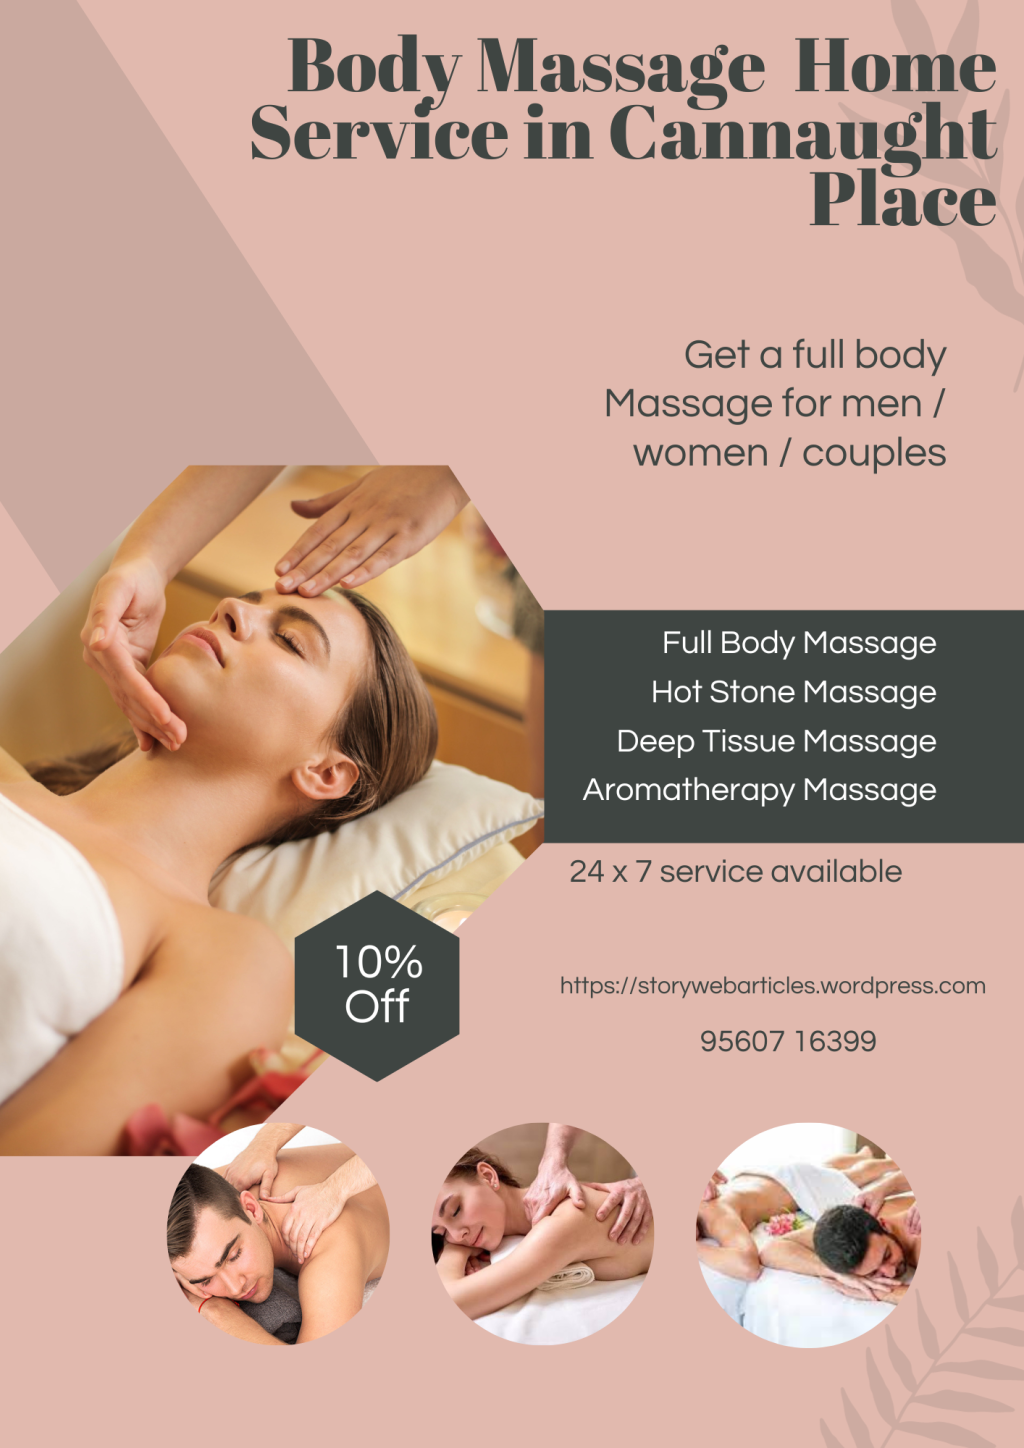 Why hire Body Massage Home Service in Connaught Place New Delhi